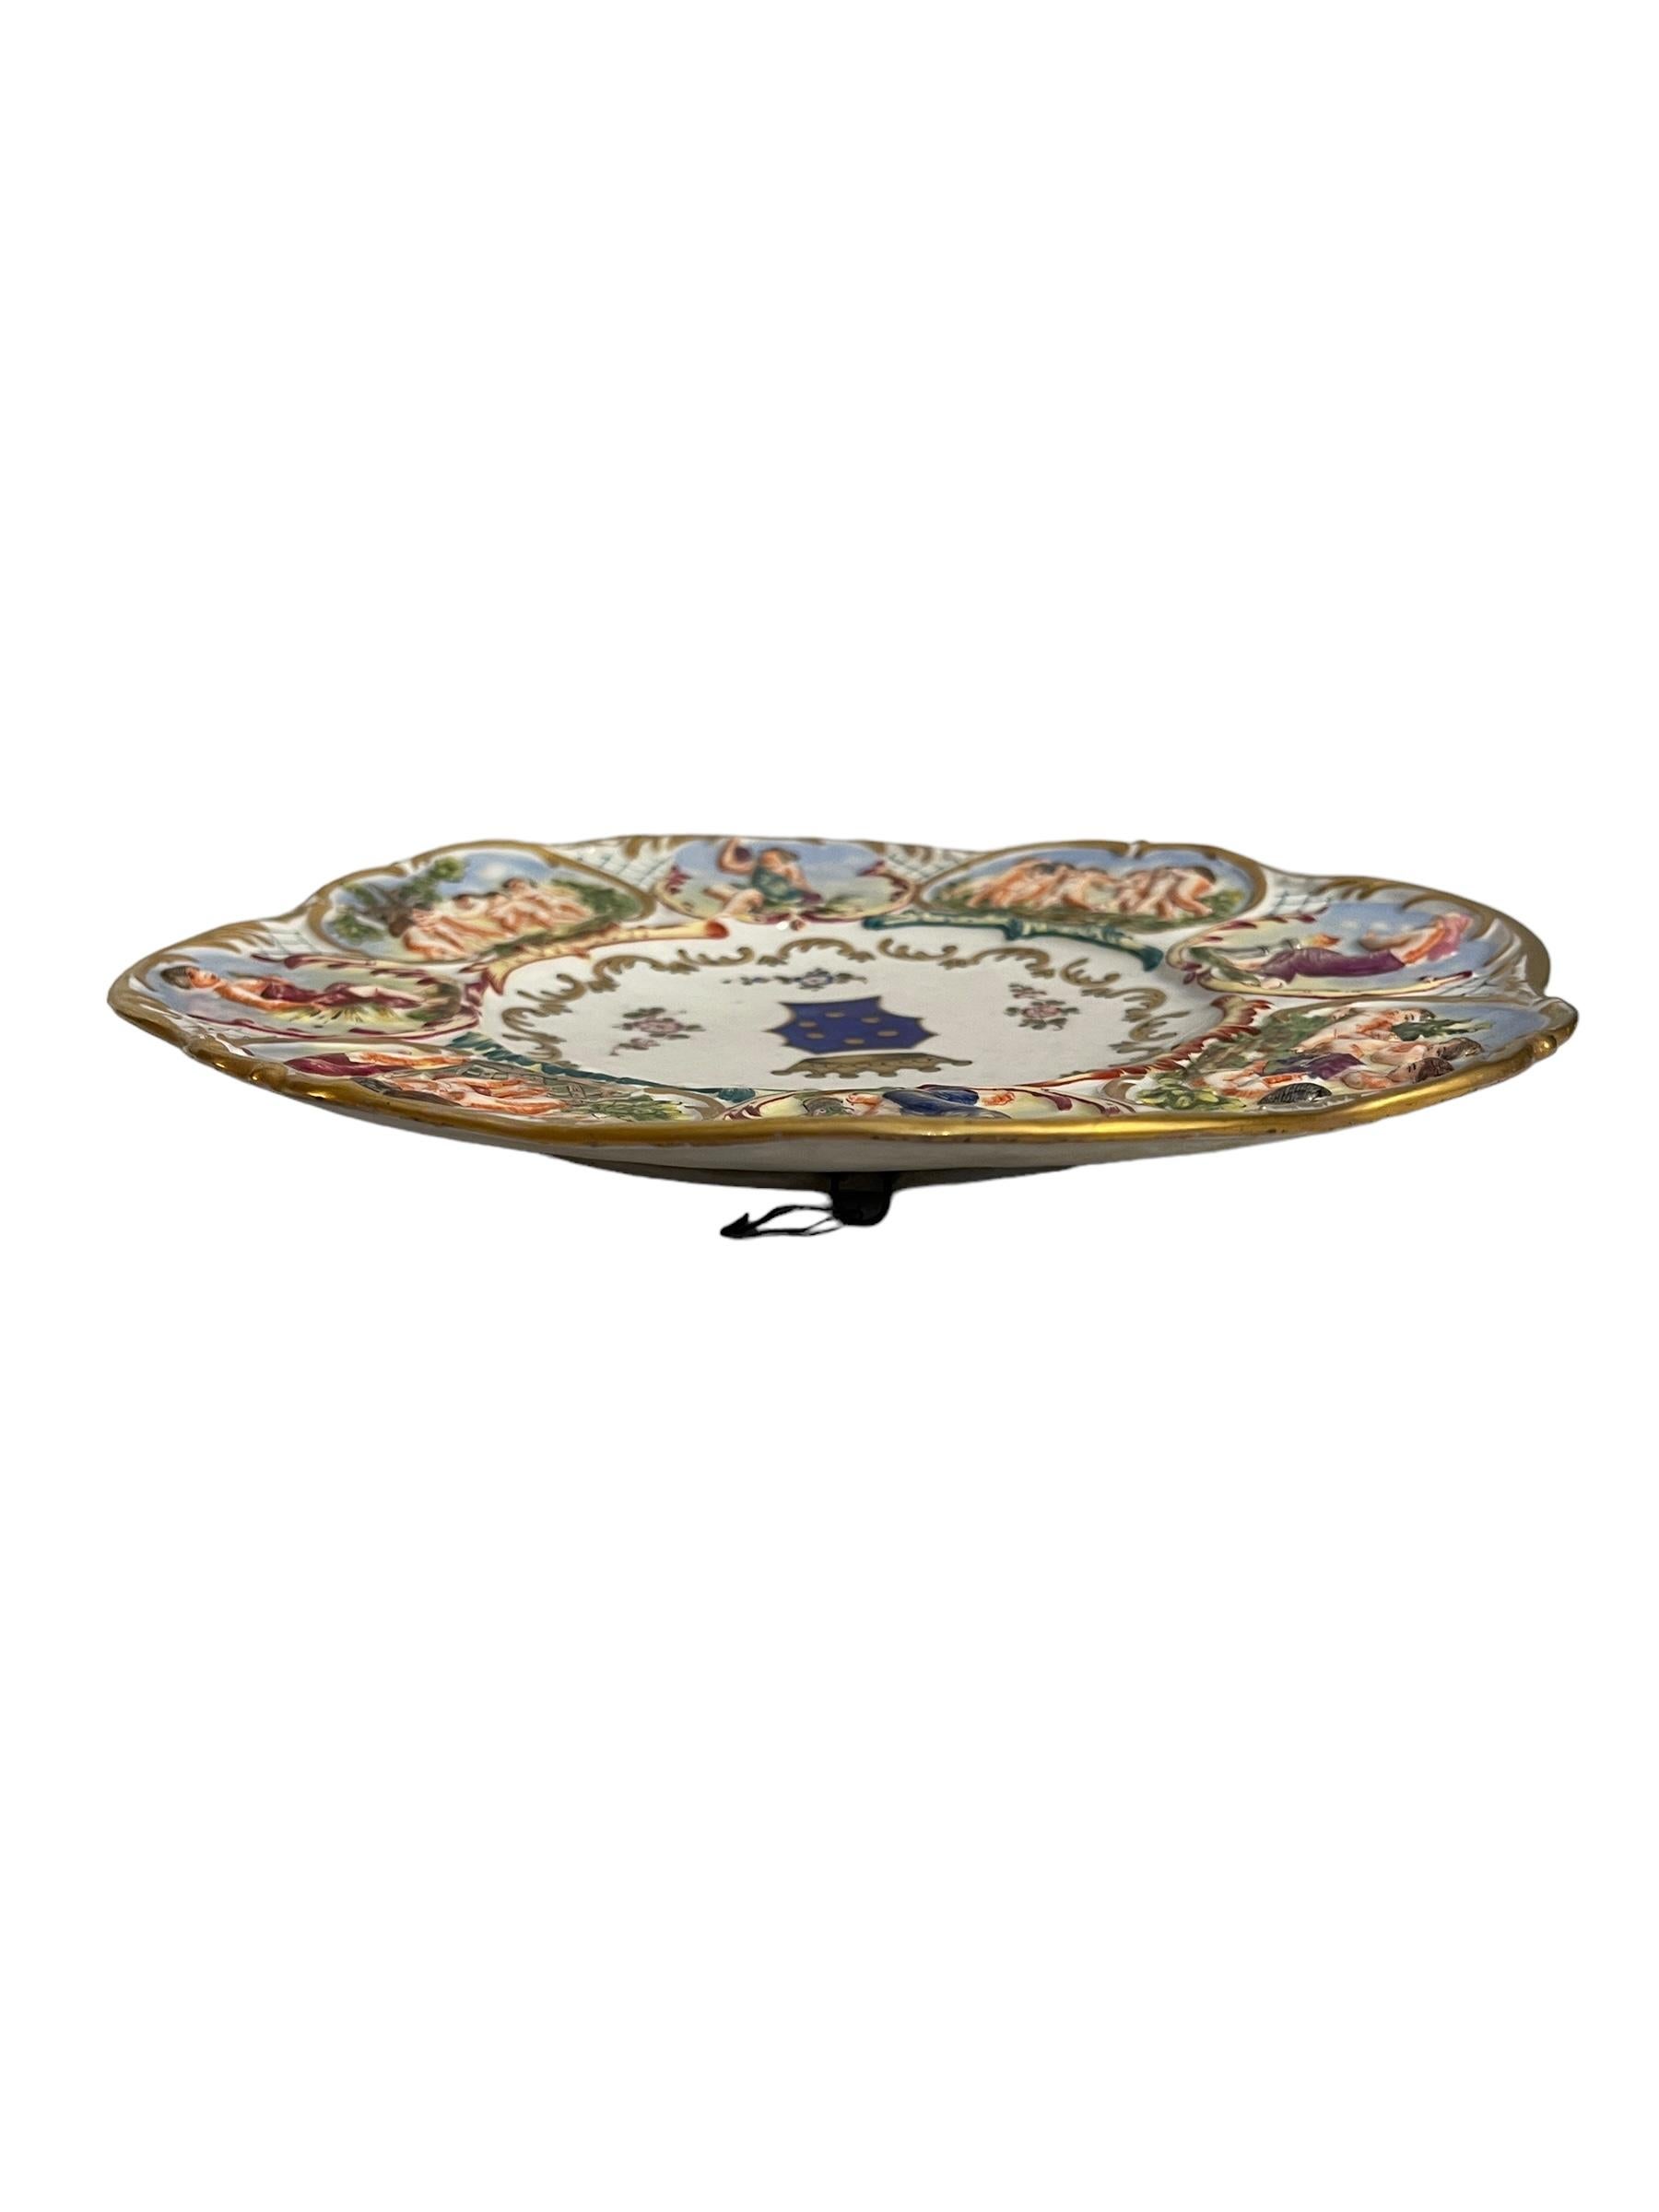 Napoleon III Worked and decorated ceramic plate, Capodimonte, 19th-20th century For Sale